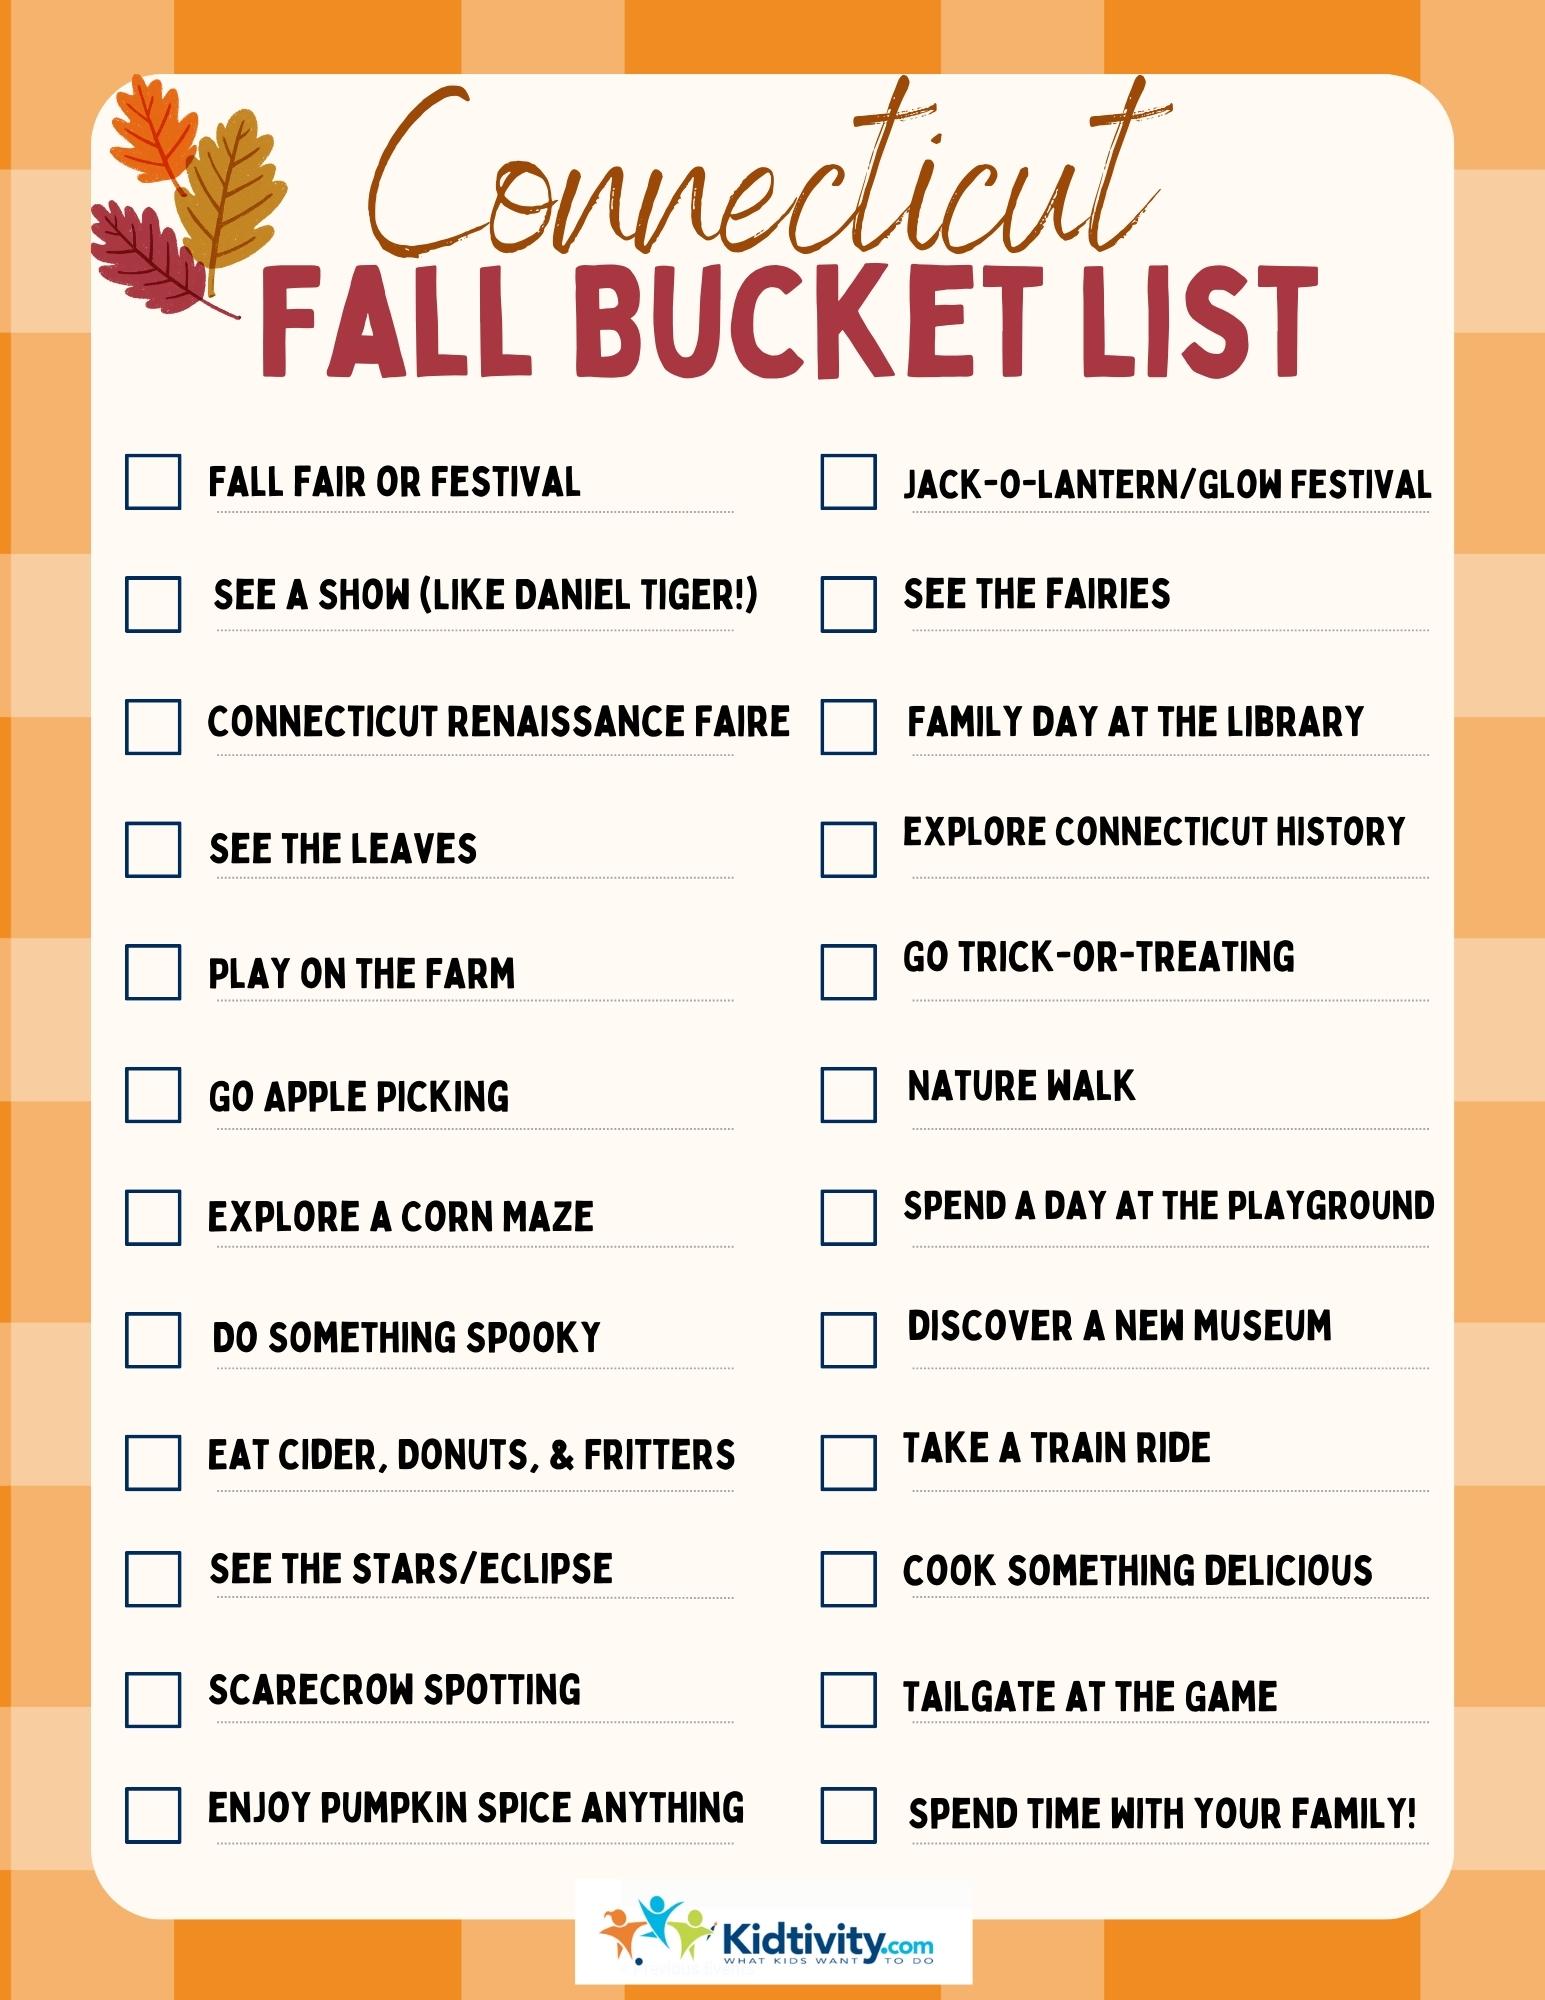 What's on Your Bucket List? – Heartland Precepts